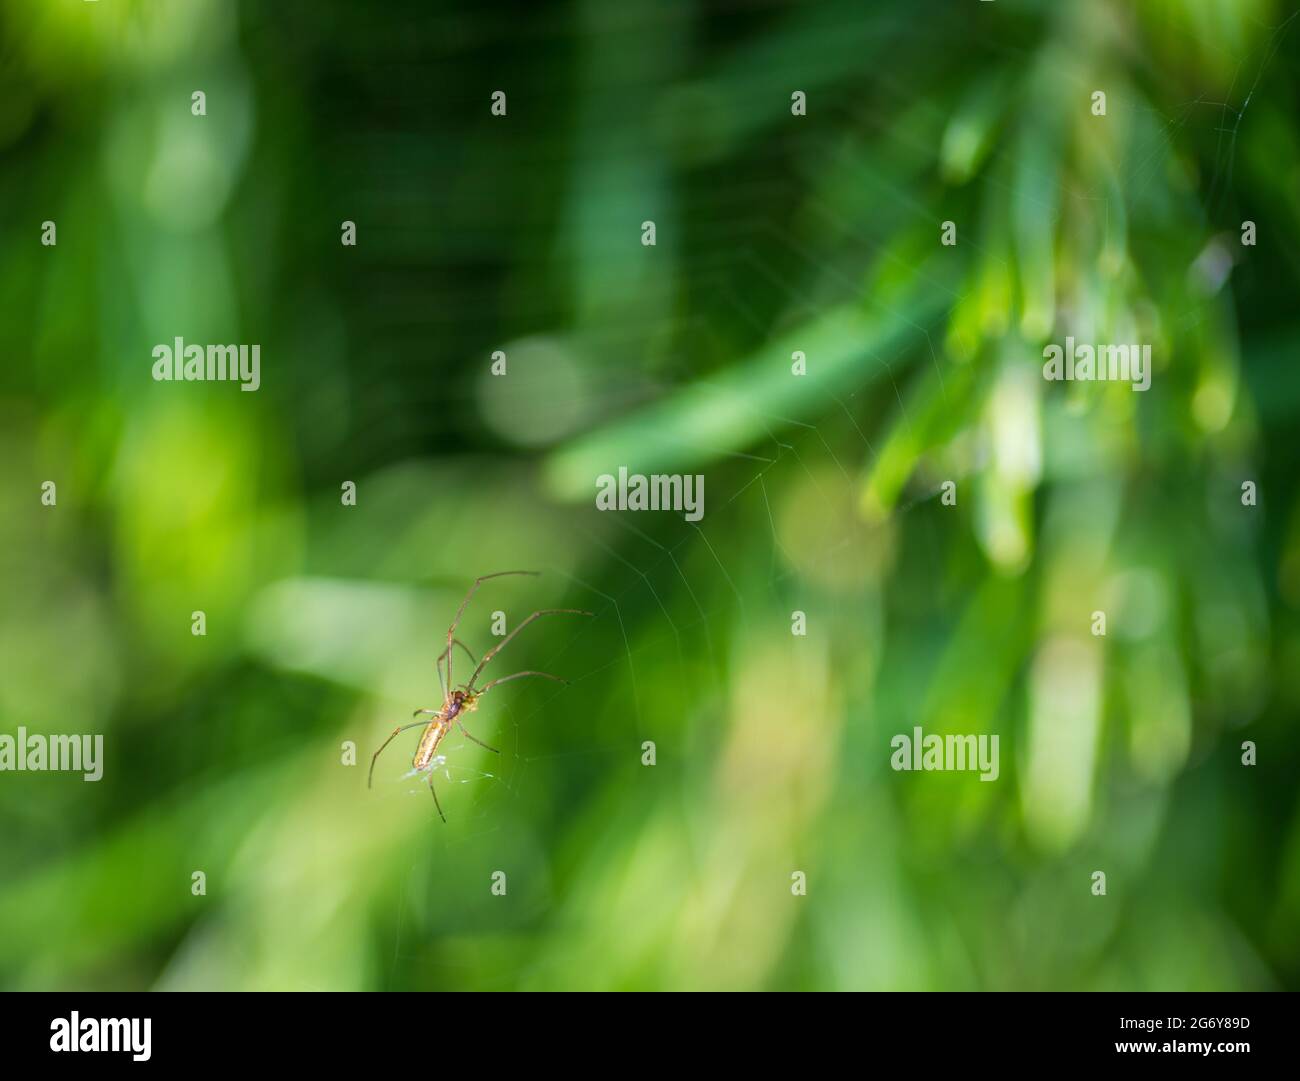 Spider and spiderweb over blurred green background Stock Photo